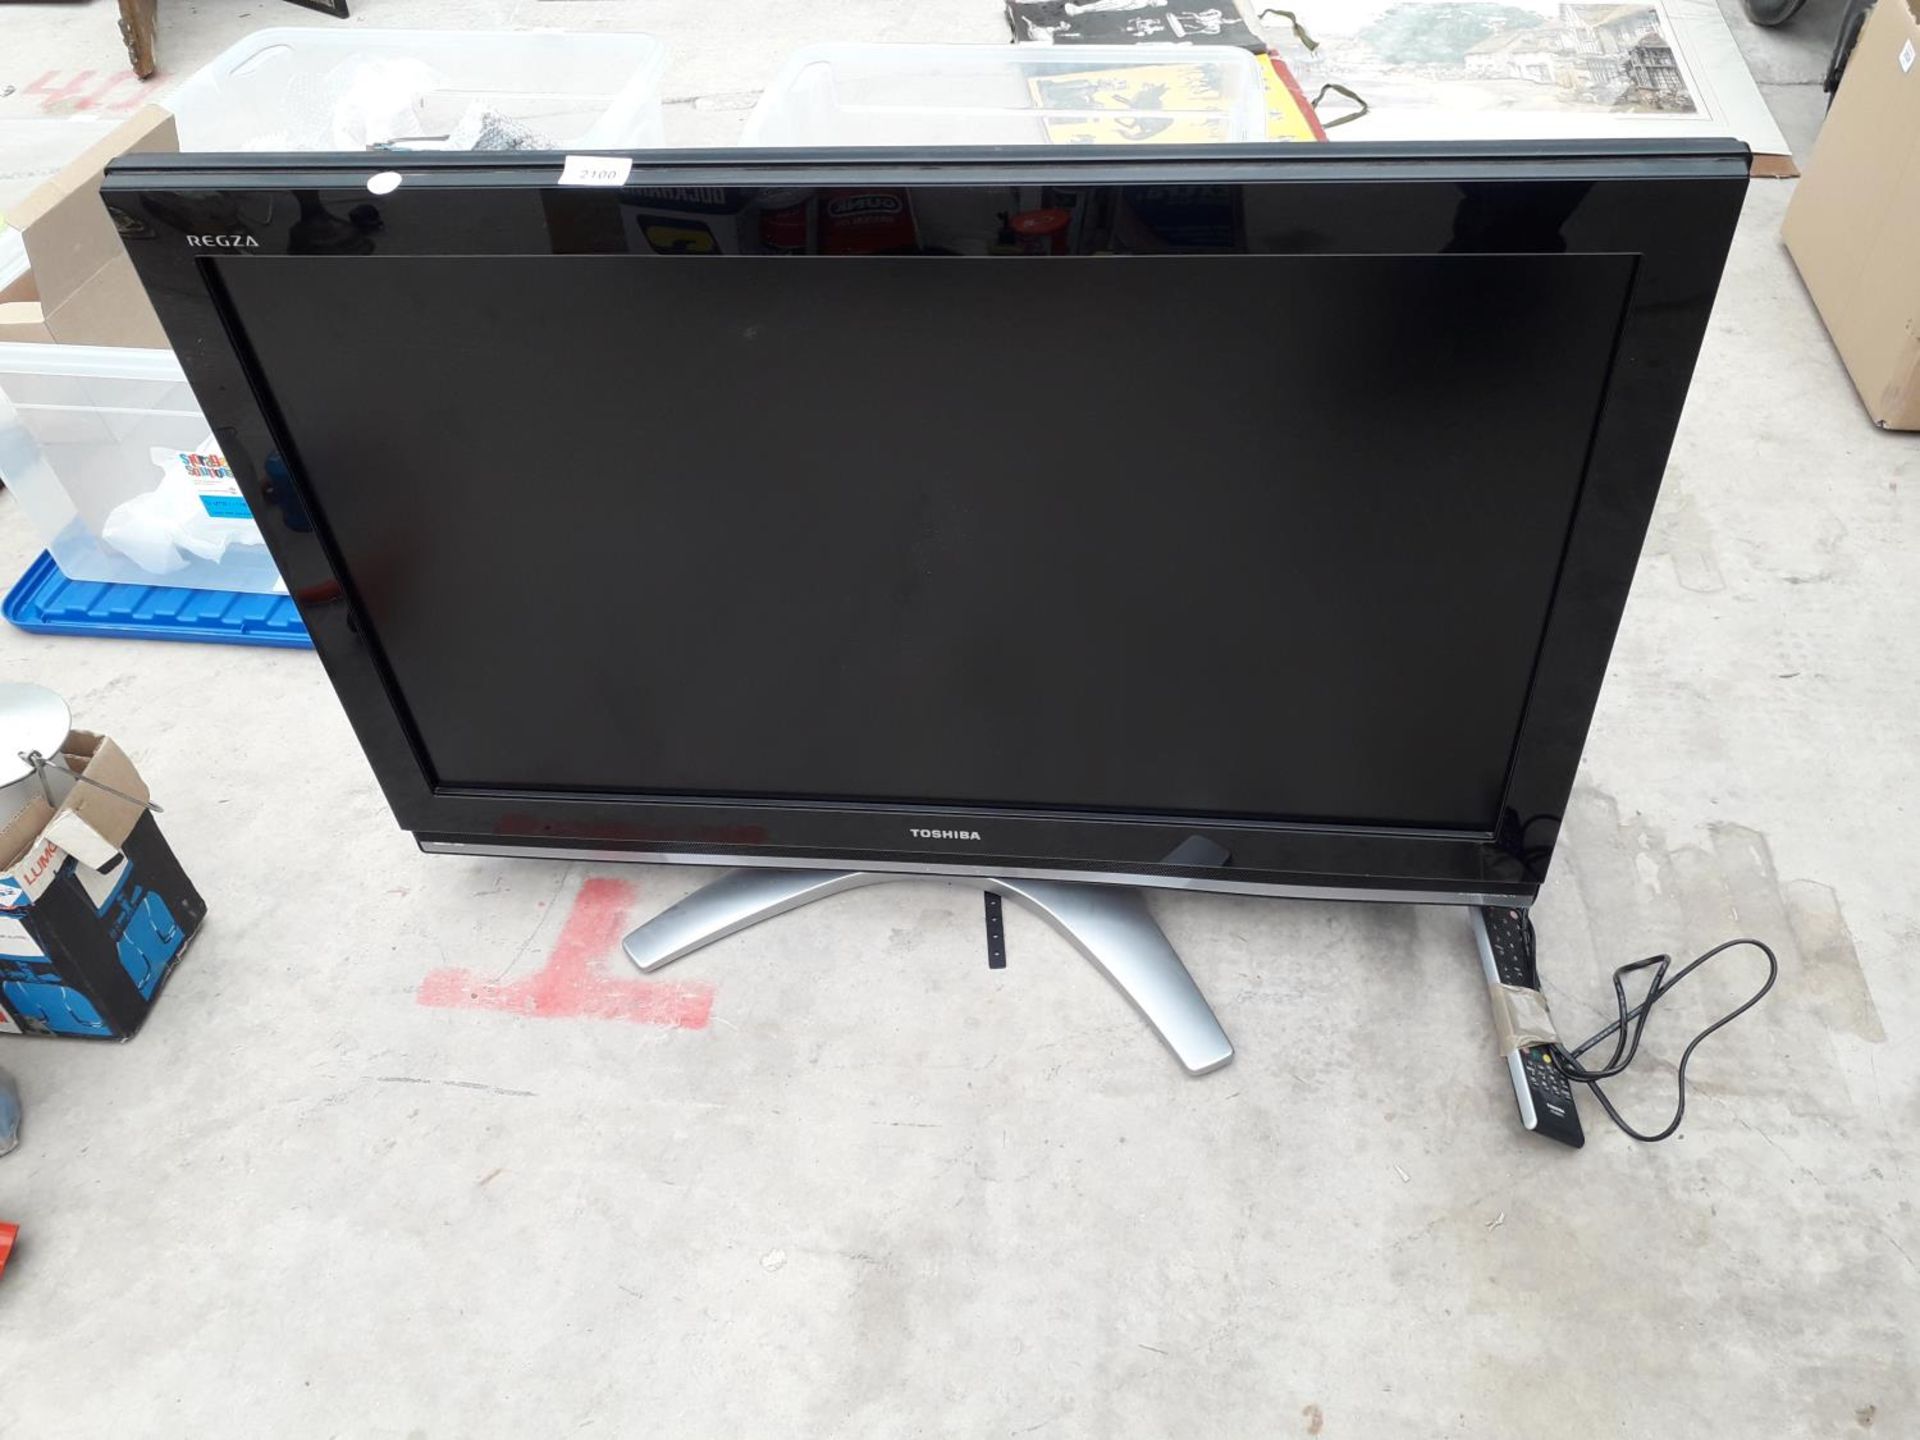 A TOSHIBA 37" TELEVISION WITH REMOTE CONTROL